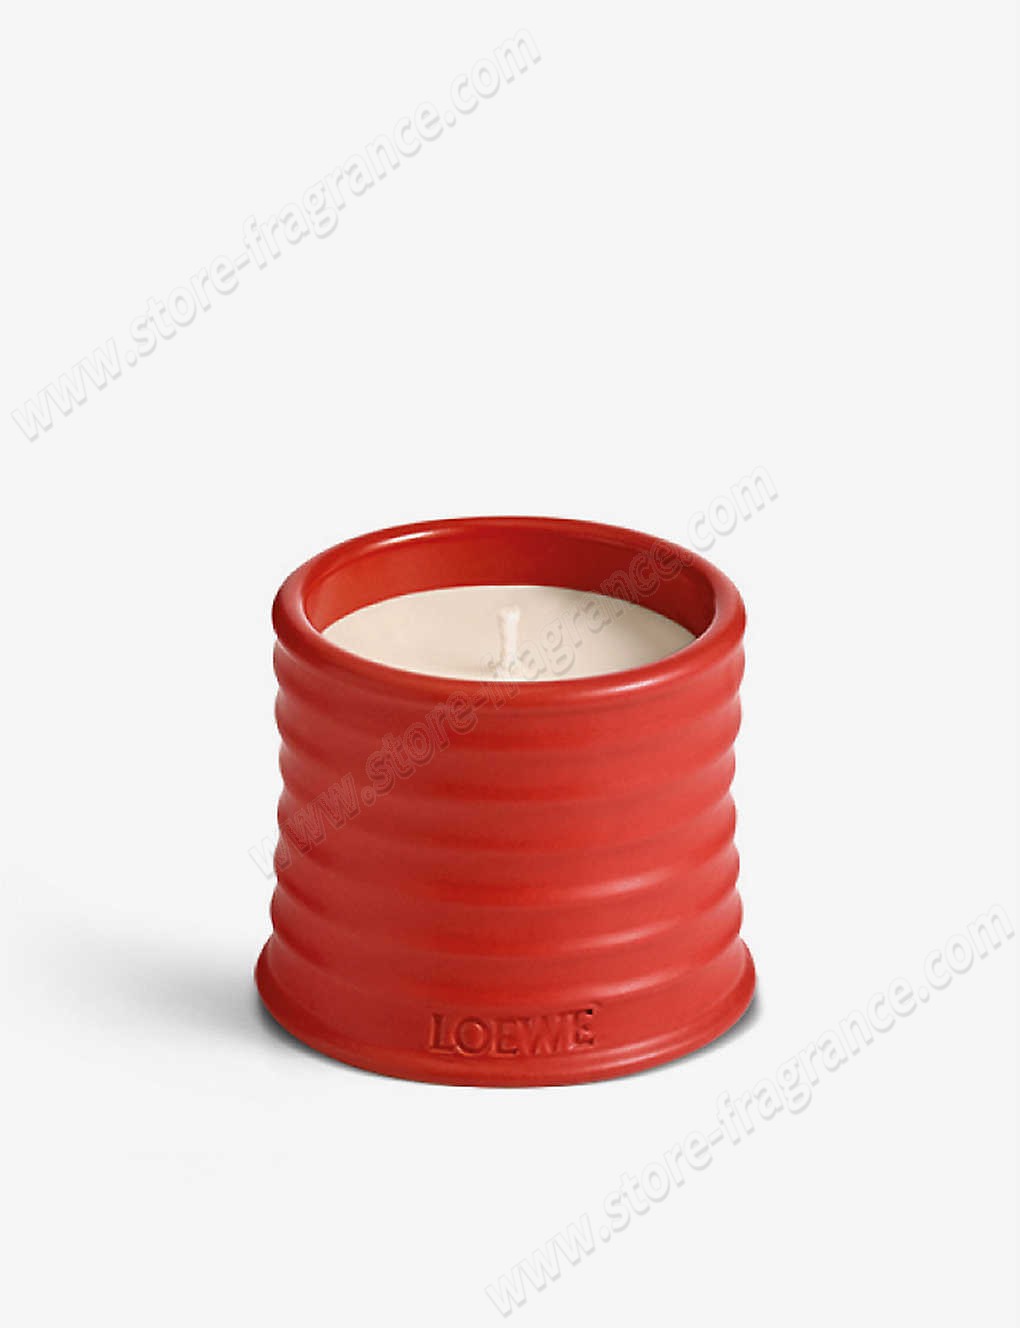 LOEWE/Tomato Leaves scented candle 170g ✿ Discount Store - LOEWE/Tomato Leaves scented candle 170g ✿ Discount Store